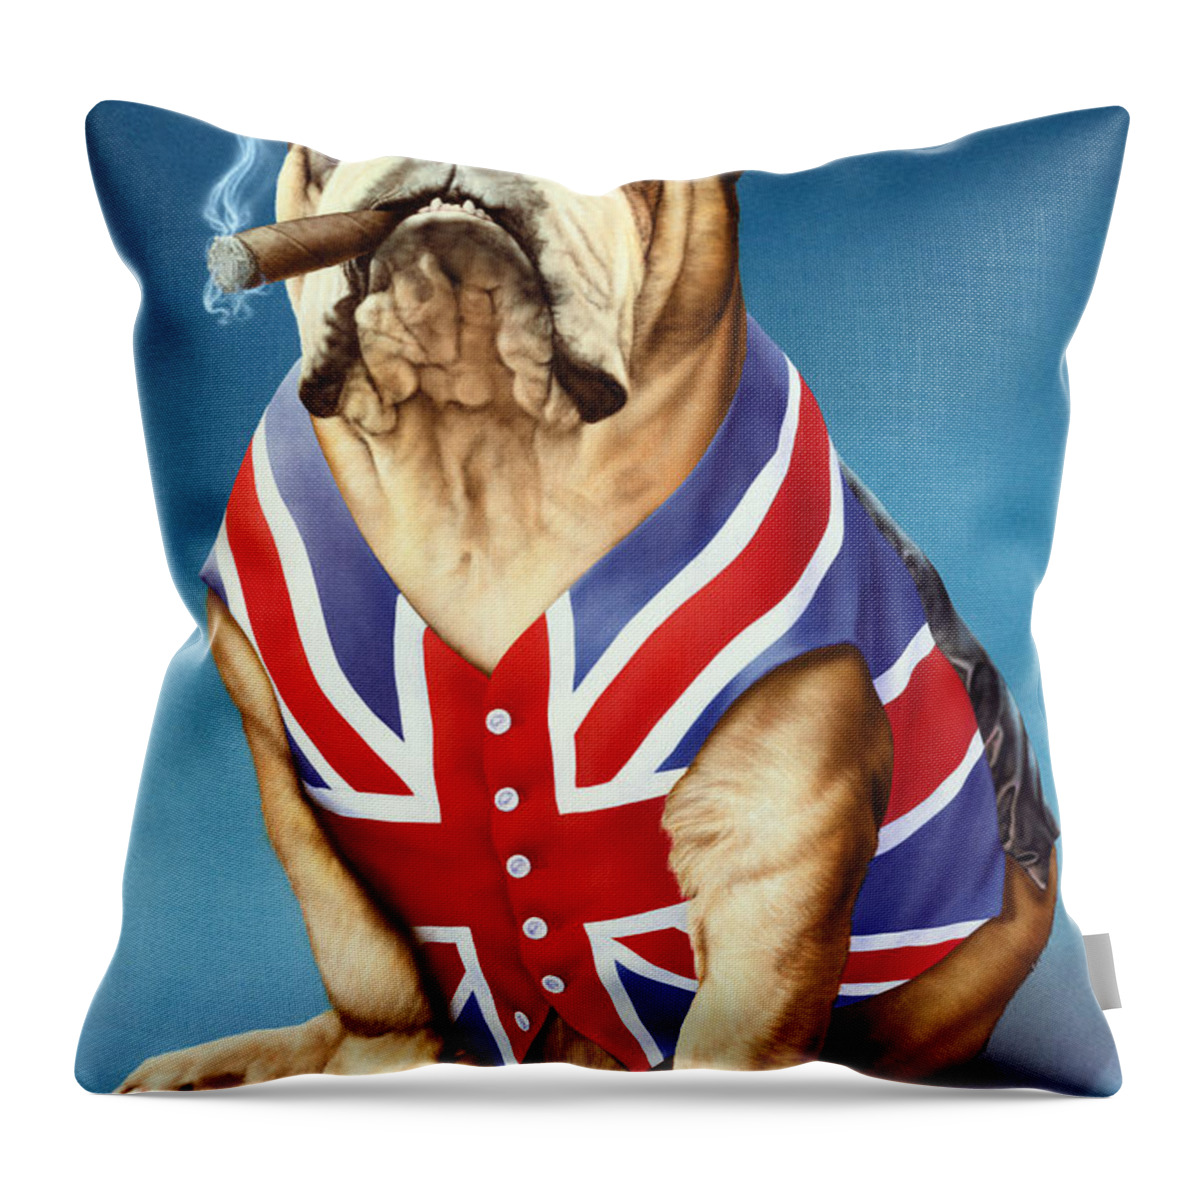 British Throw Pillow featuring the photograph British Bulldog by MGL Meiklejohn Graphics Licensing